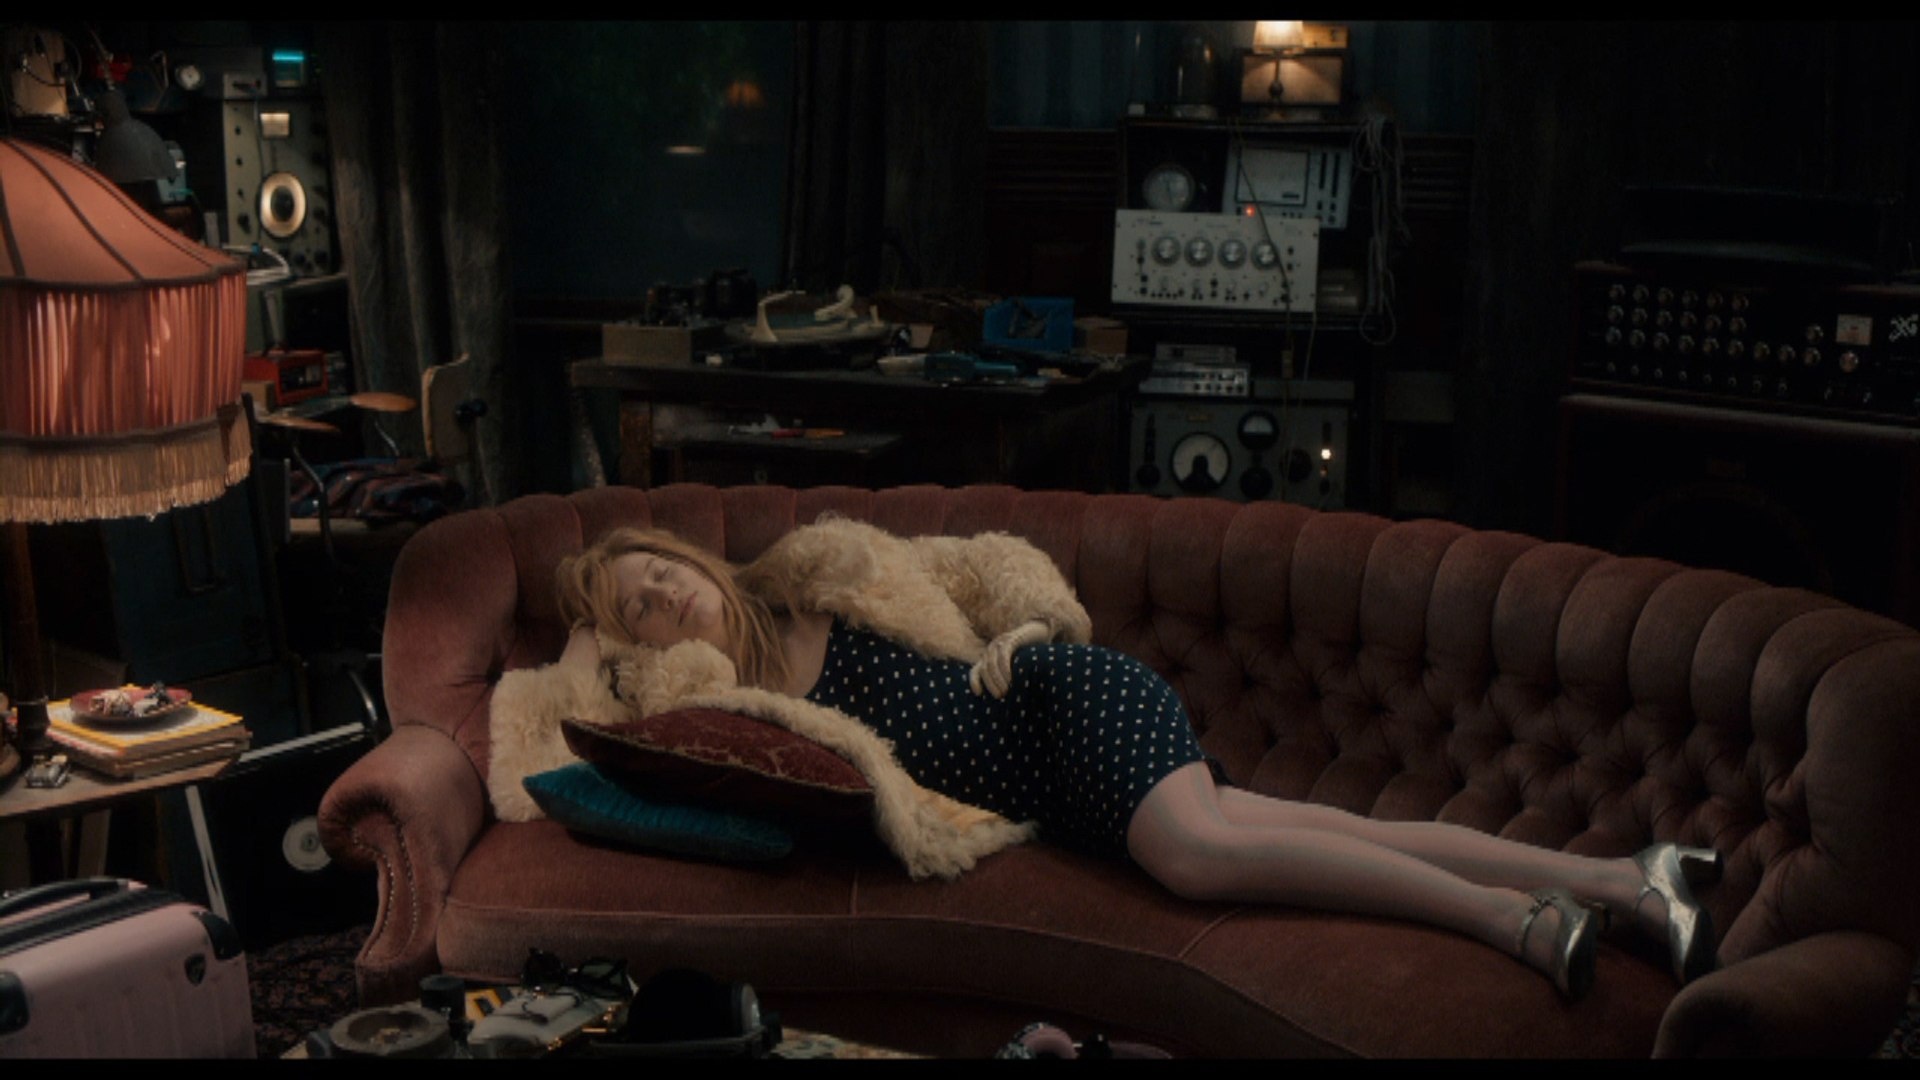 Only Lovers Left Alive movies, Samantha Simpson photos, Posted by Samantha, Wallpapers, 1920x1080 Full HD Desktop